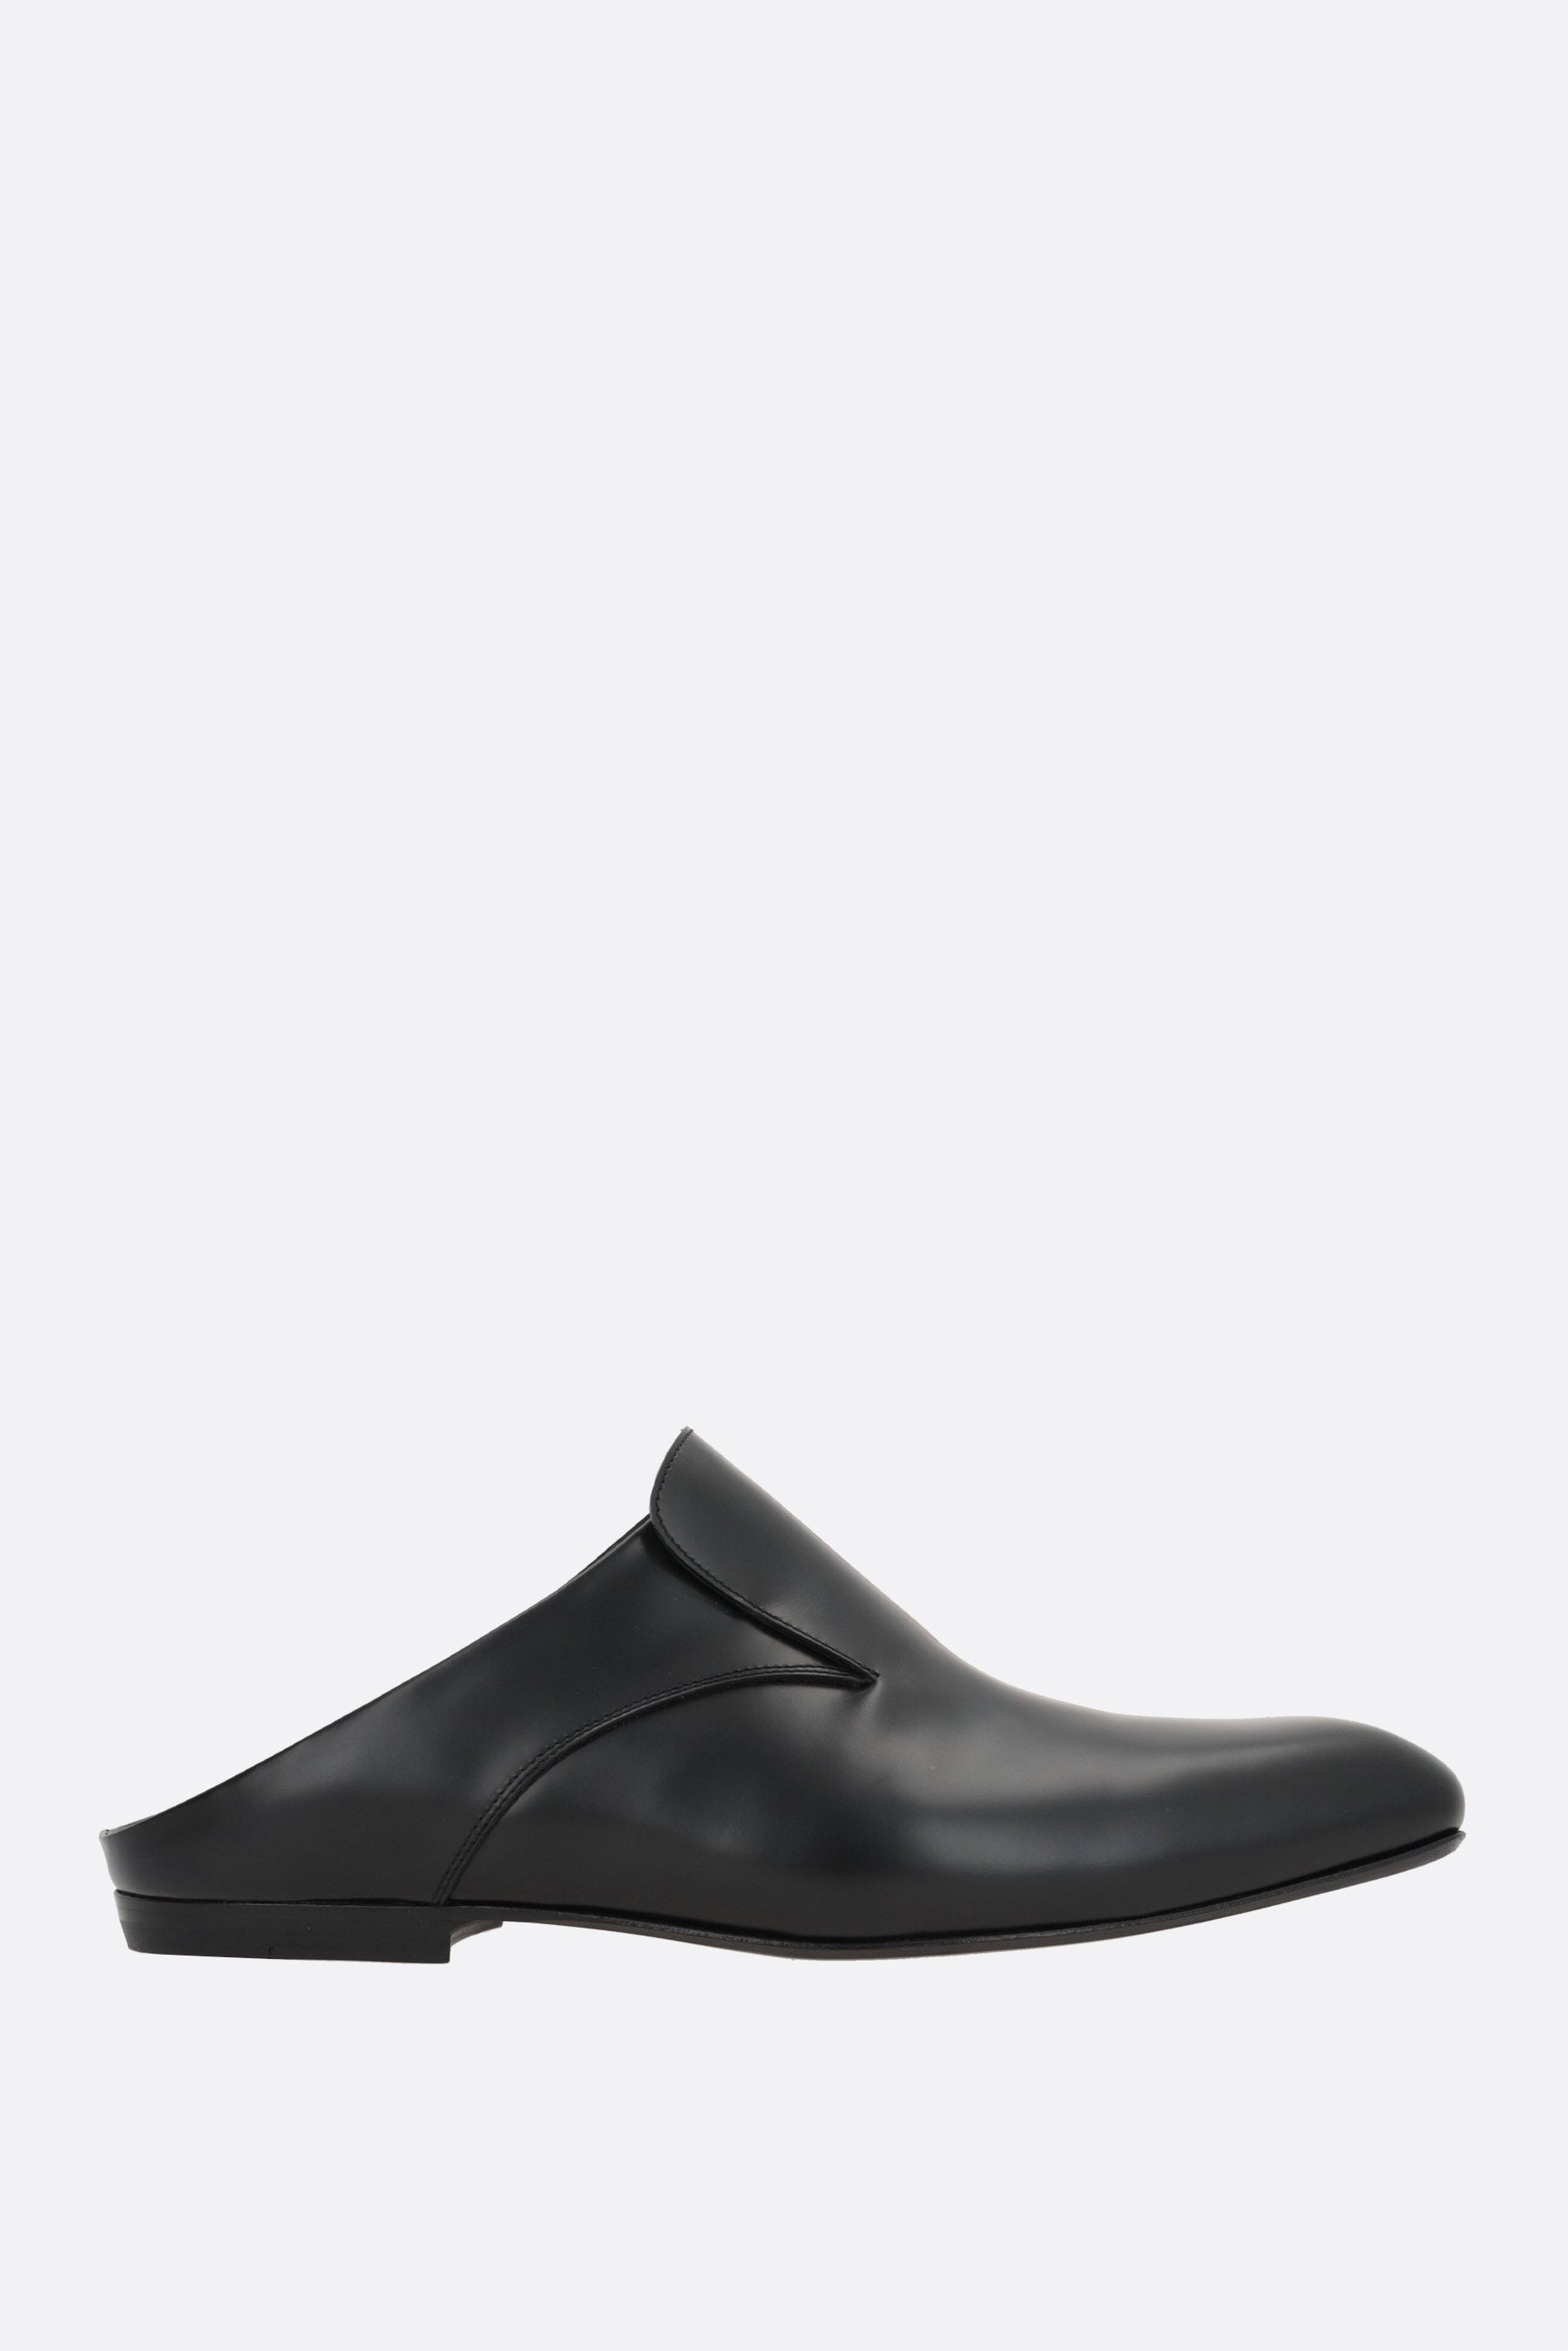 smooth leather flat mules